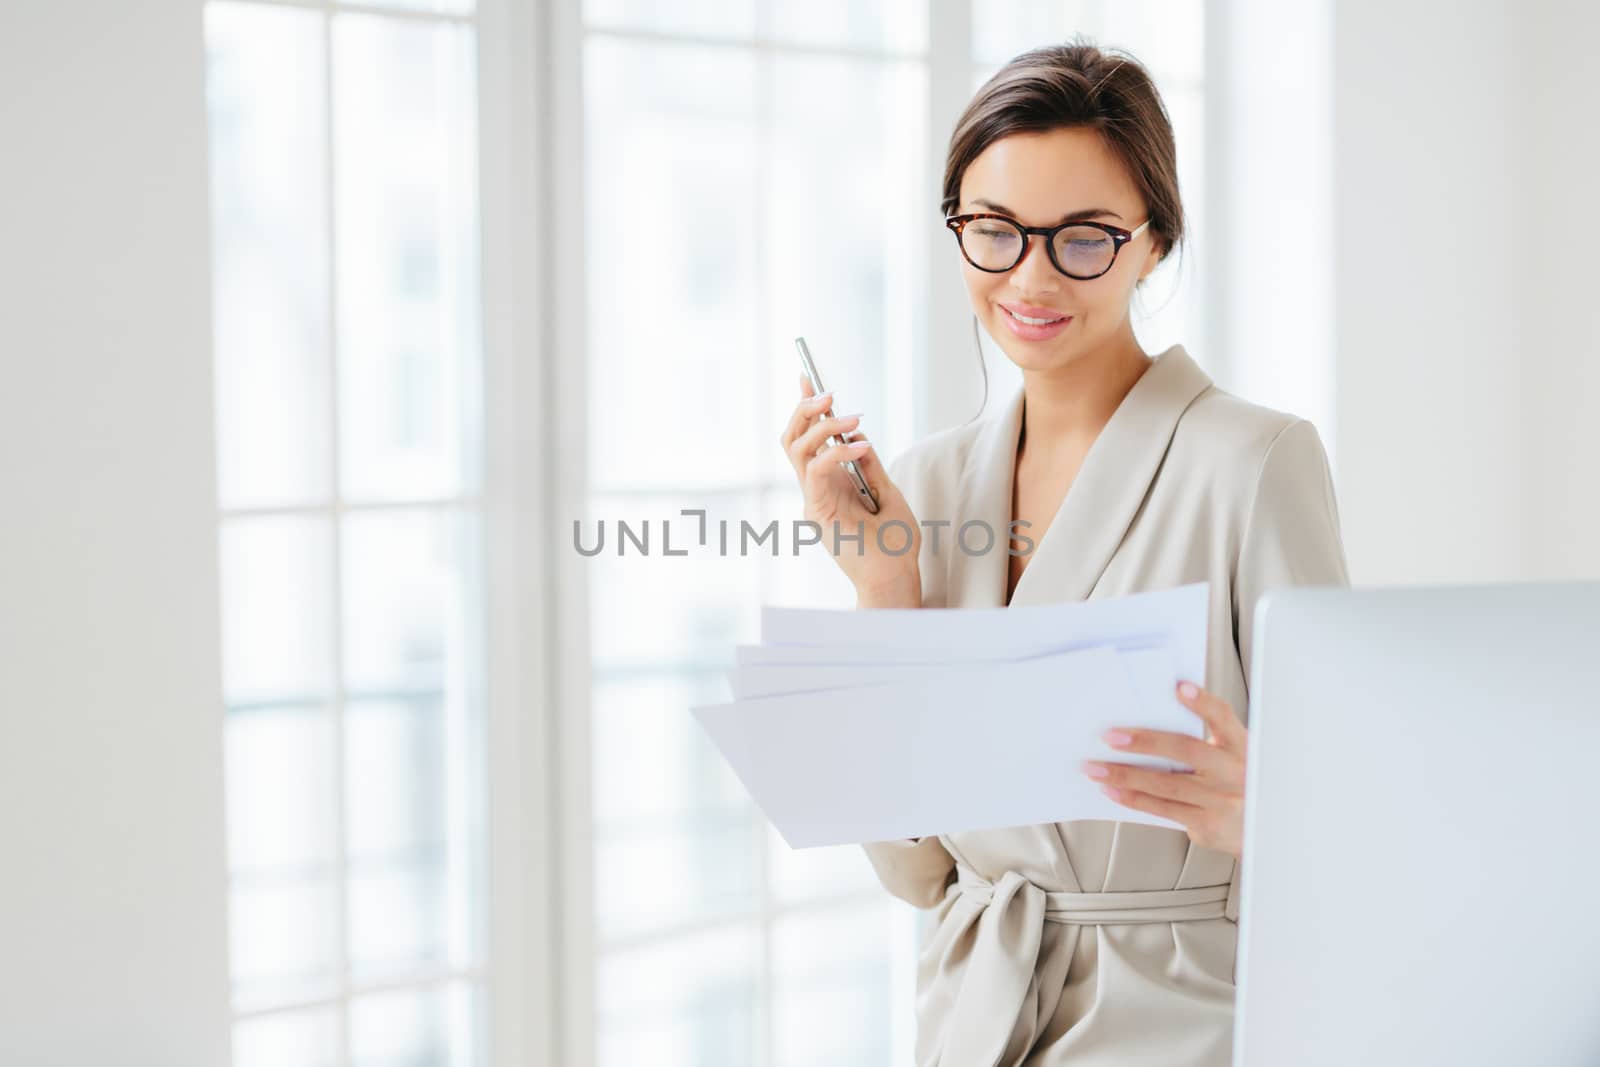 Photo of satisfied young woman with dark hair dressed in business suit, focused in papers, works in office, holds modern cellphone, wears optical glasses for good vision, has pleased expression